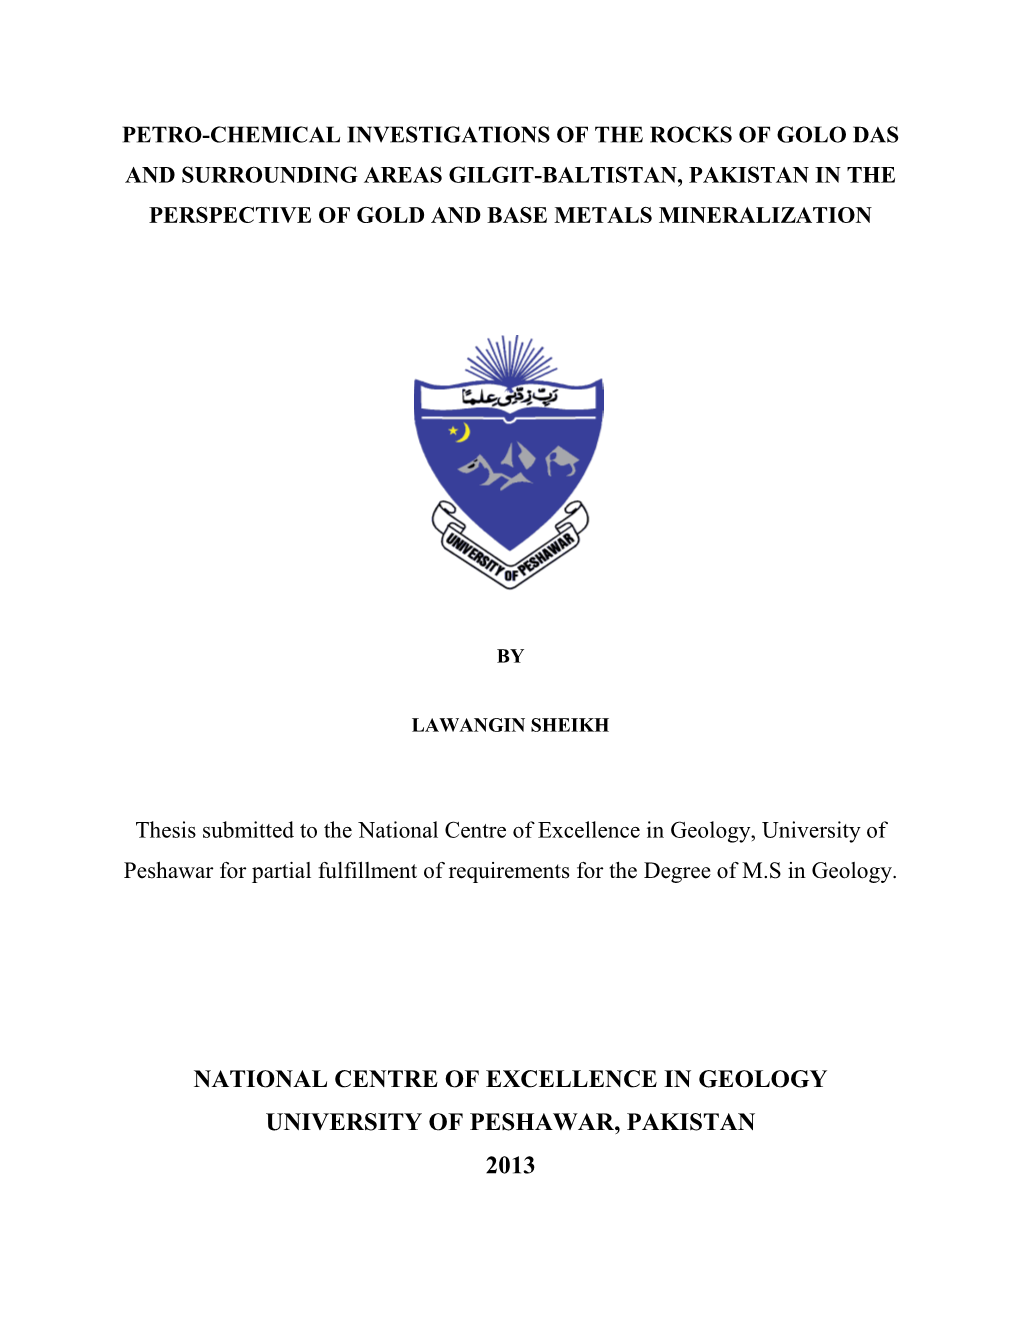 National Centre of Excellence in Geology, University of Peshawar for Partial Fulfillment of Requirements for the Degree of M.S in Geology